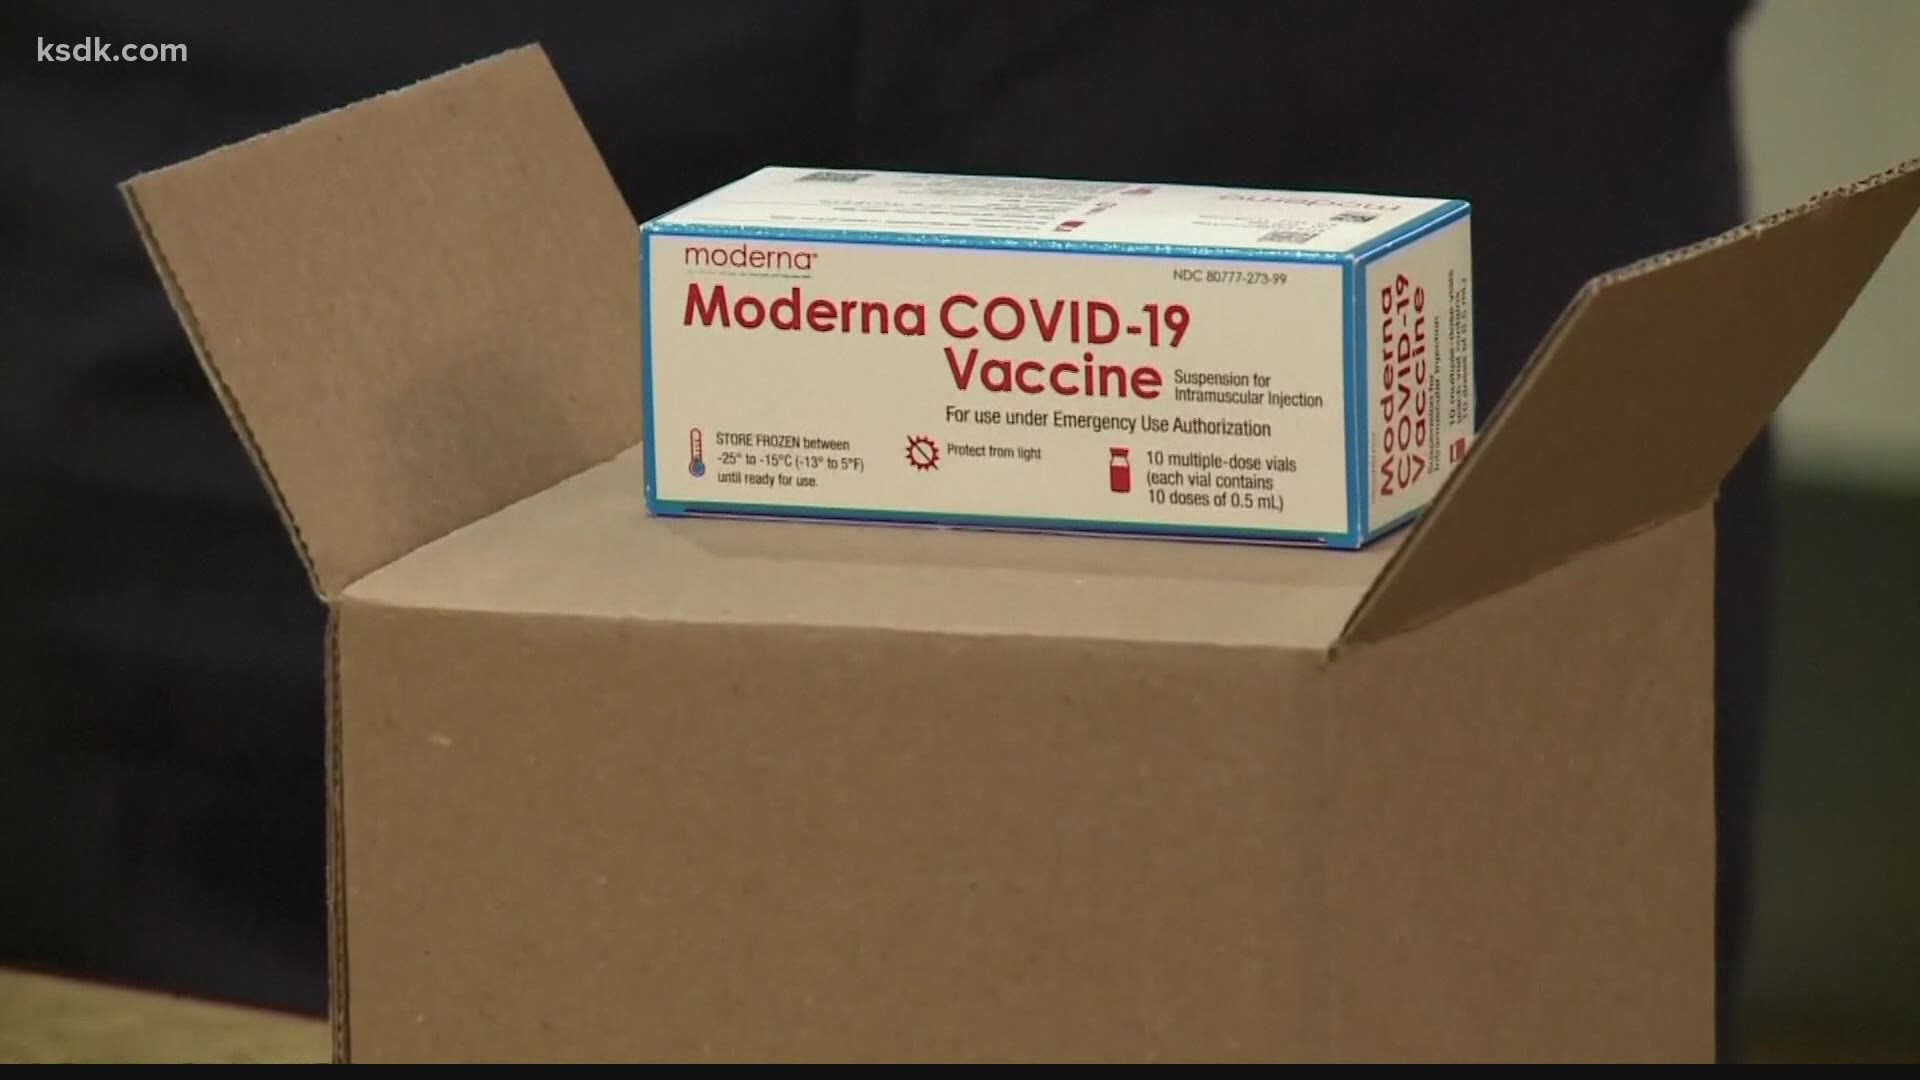 This comes as Tim Brinker says the number of vaccines sent to the region doesn't match population percentage